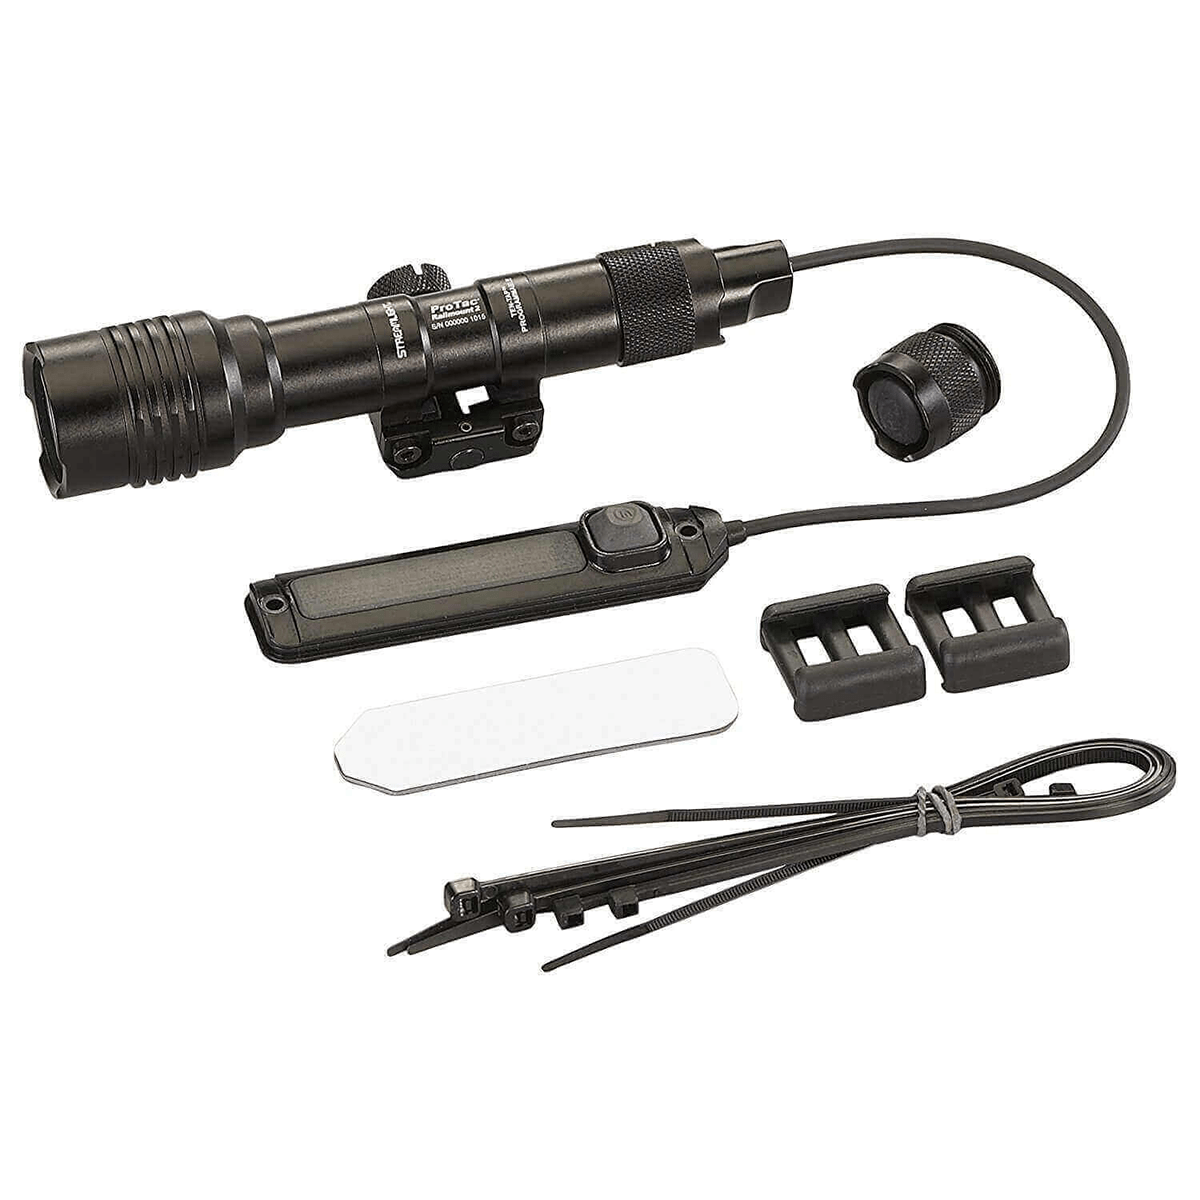 Streamlight ProTac Rail Mount 2 625 Lumen Weaponlight with mounting system